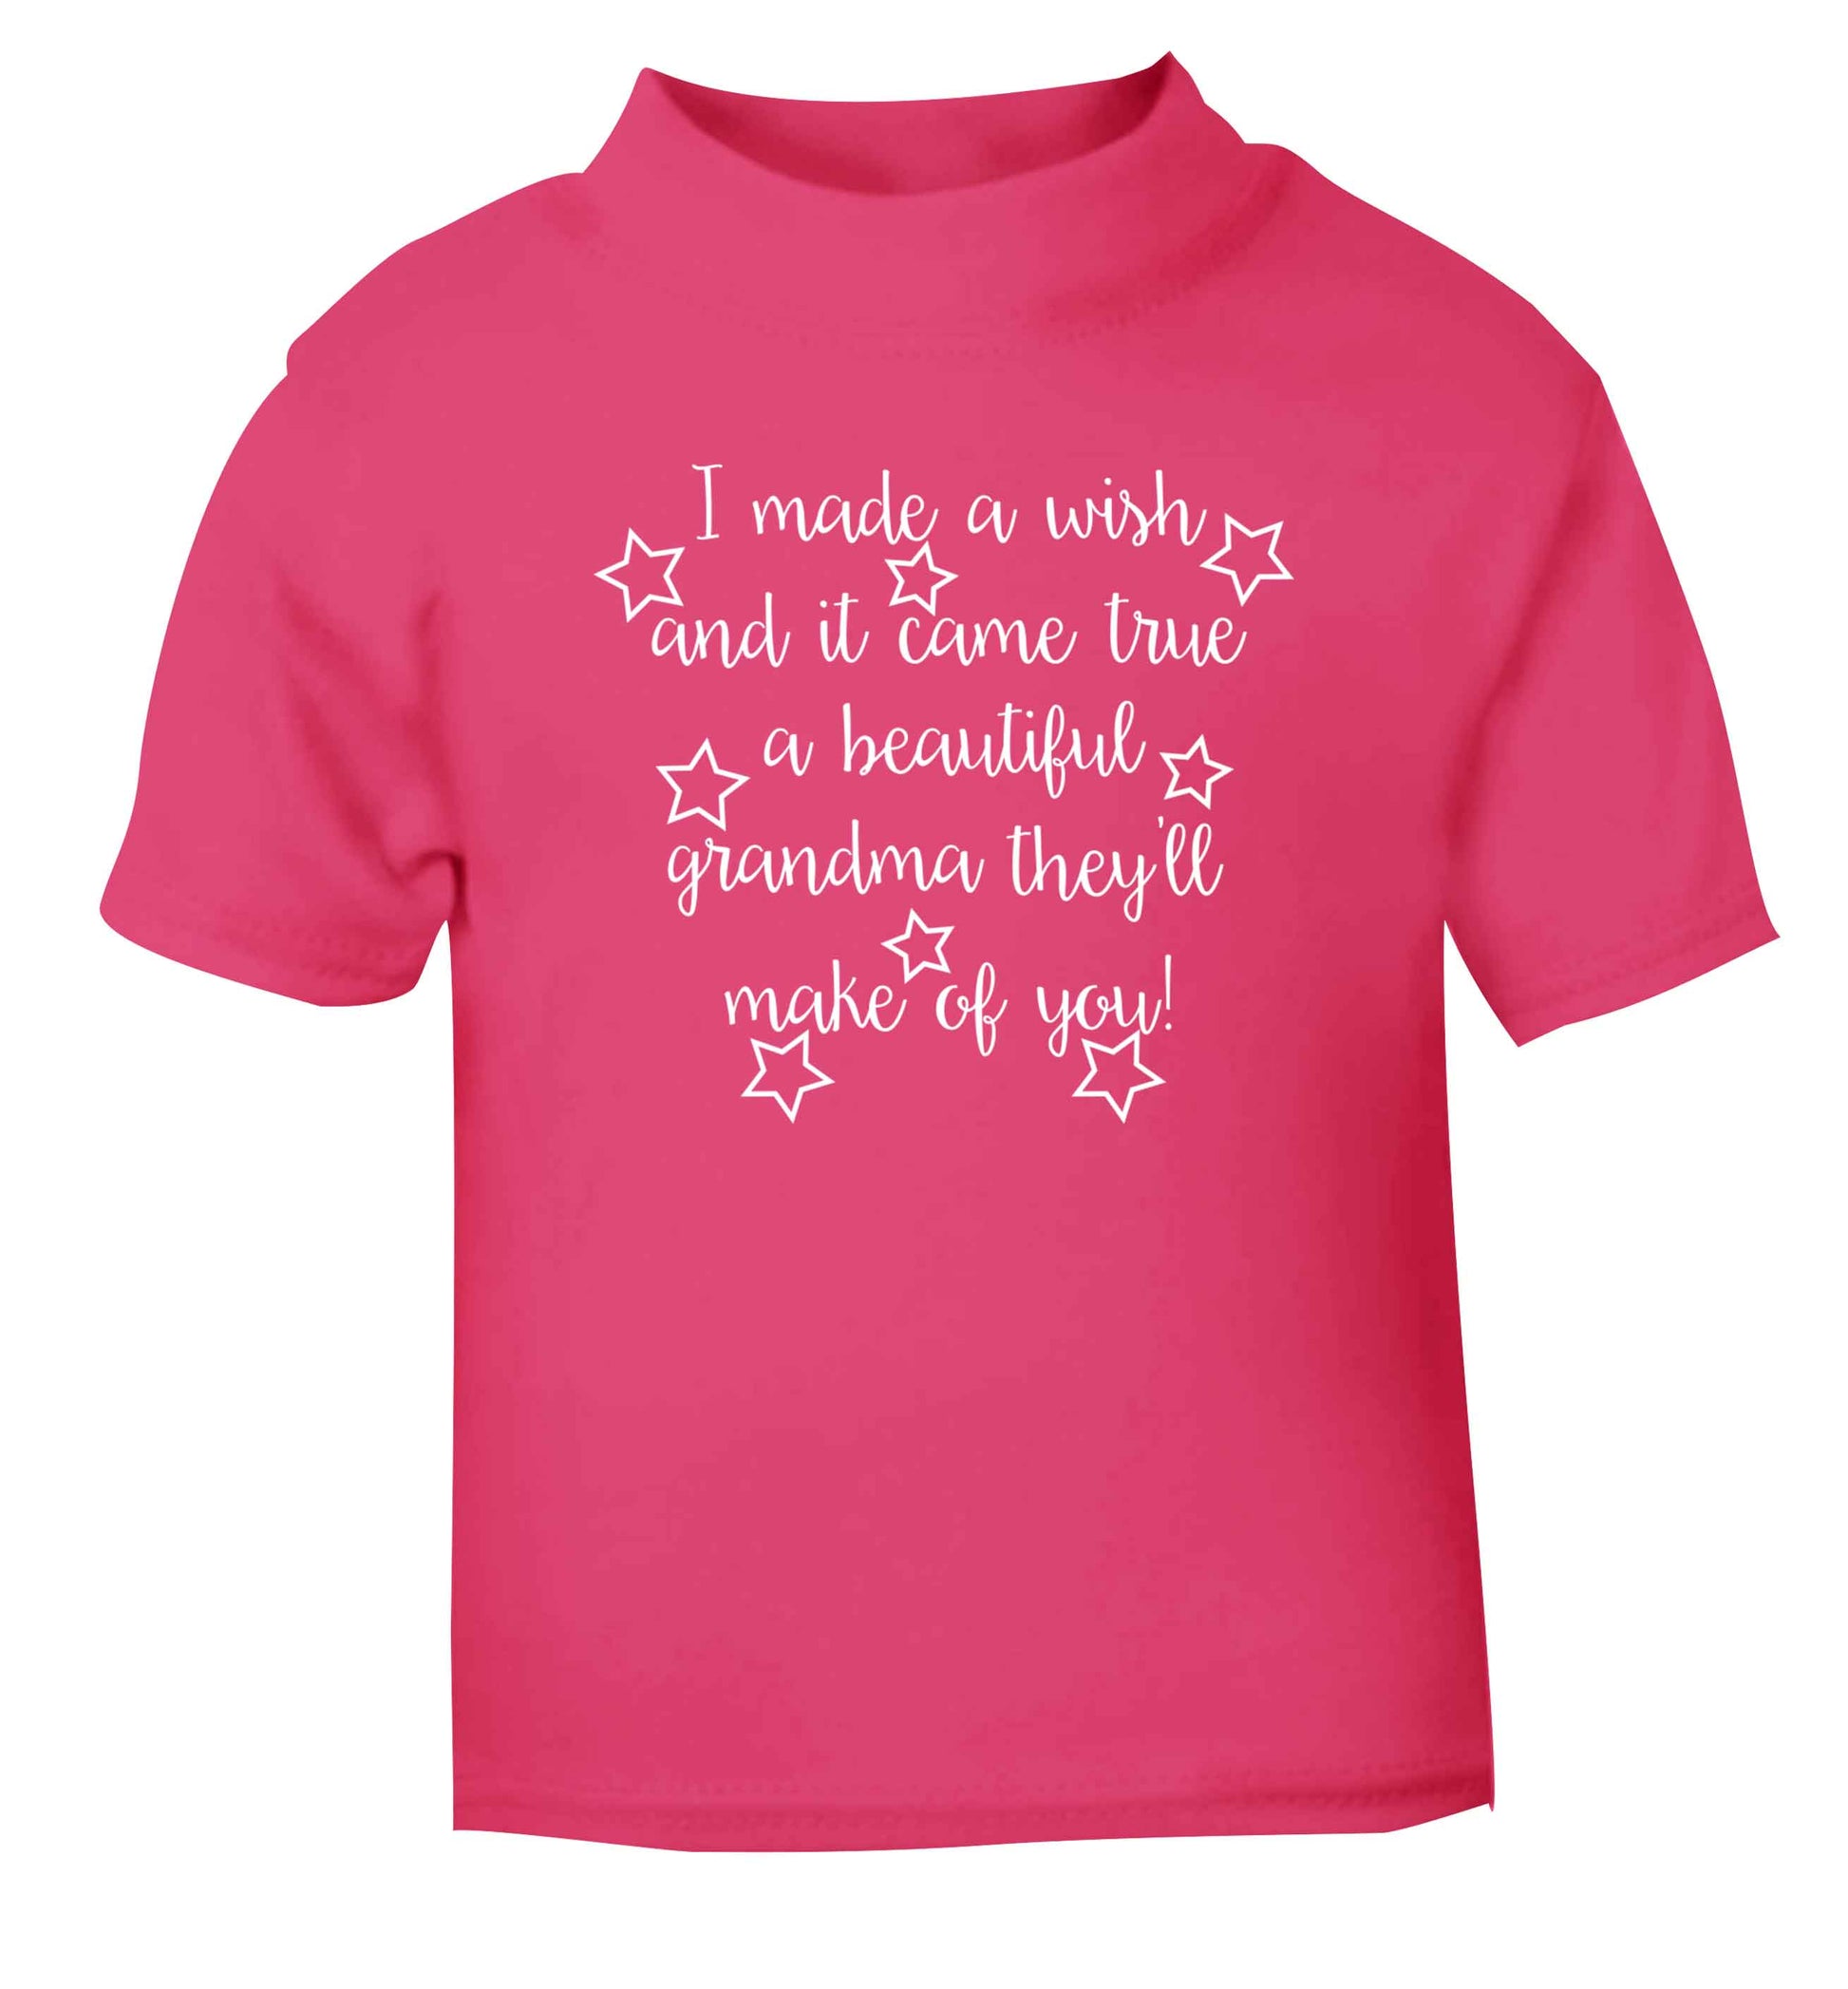 I made a wish and it came true a beautiful grandma they'll make of you! pink Baby Toddler Tshirt 2 Years